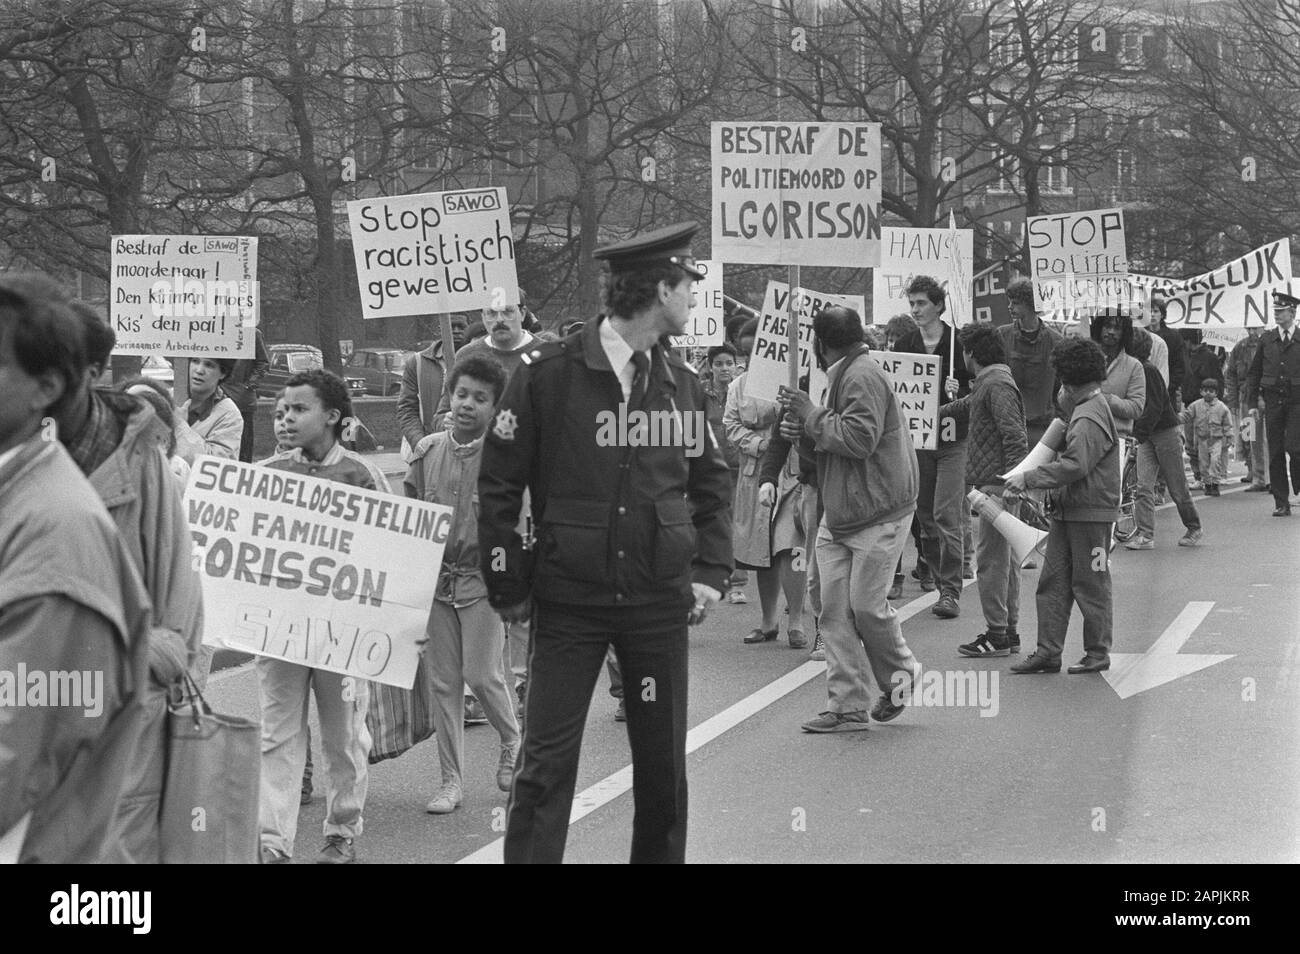 Demonstration against shooting Surinamer by police officer in The Hague Date: 26 april 1986 Location: The Hague, Zuid-Holland Keywords: demonstrations Stock Photo